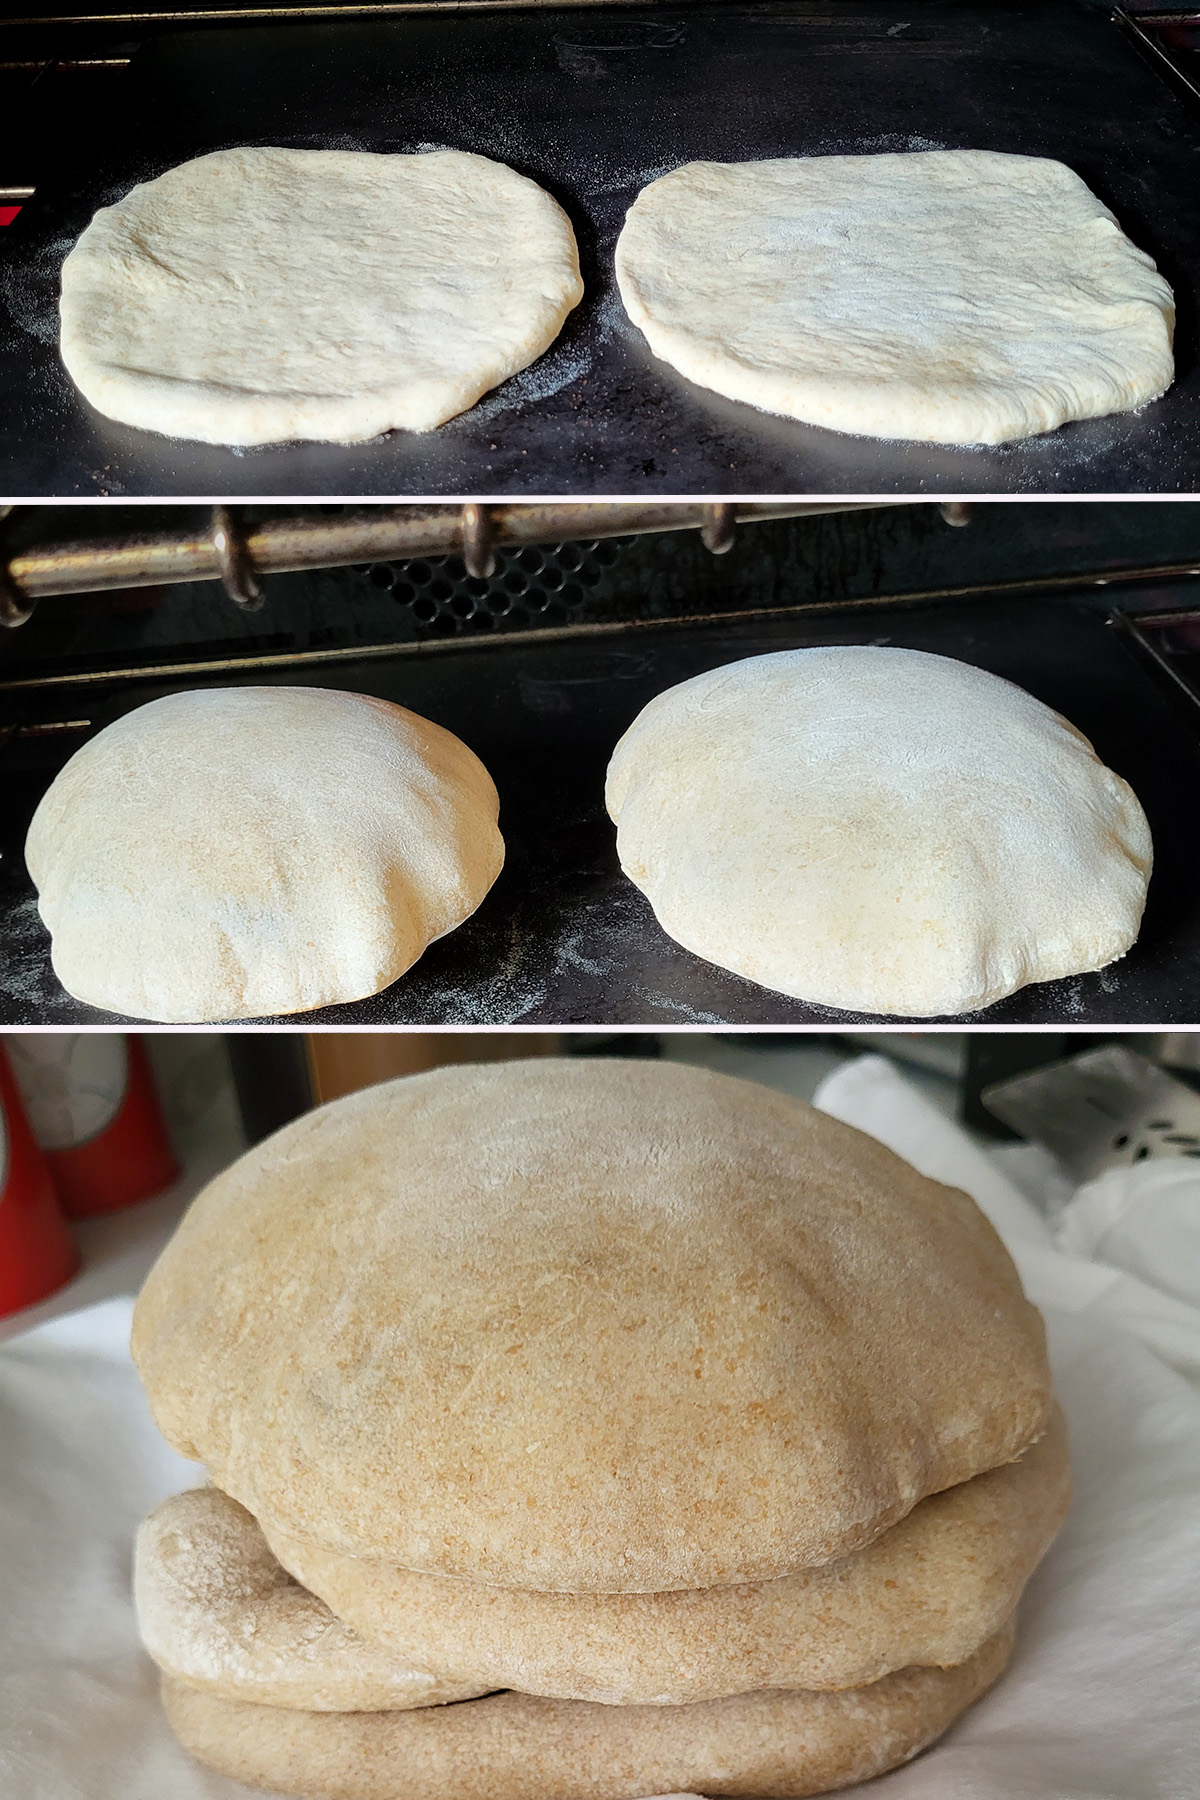 pita bread in the oven before and after puffing. a stack of pitas in a white towel.